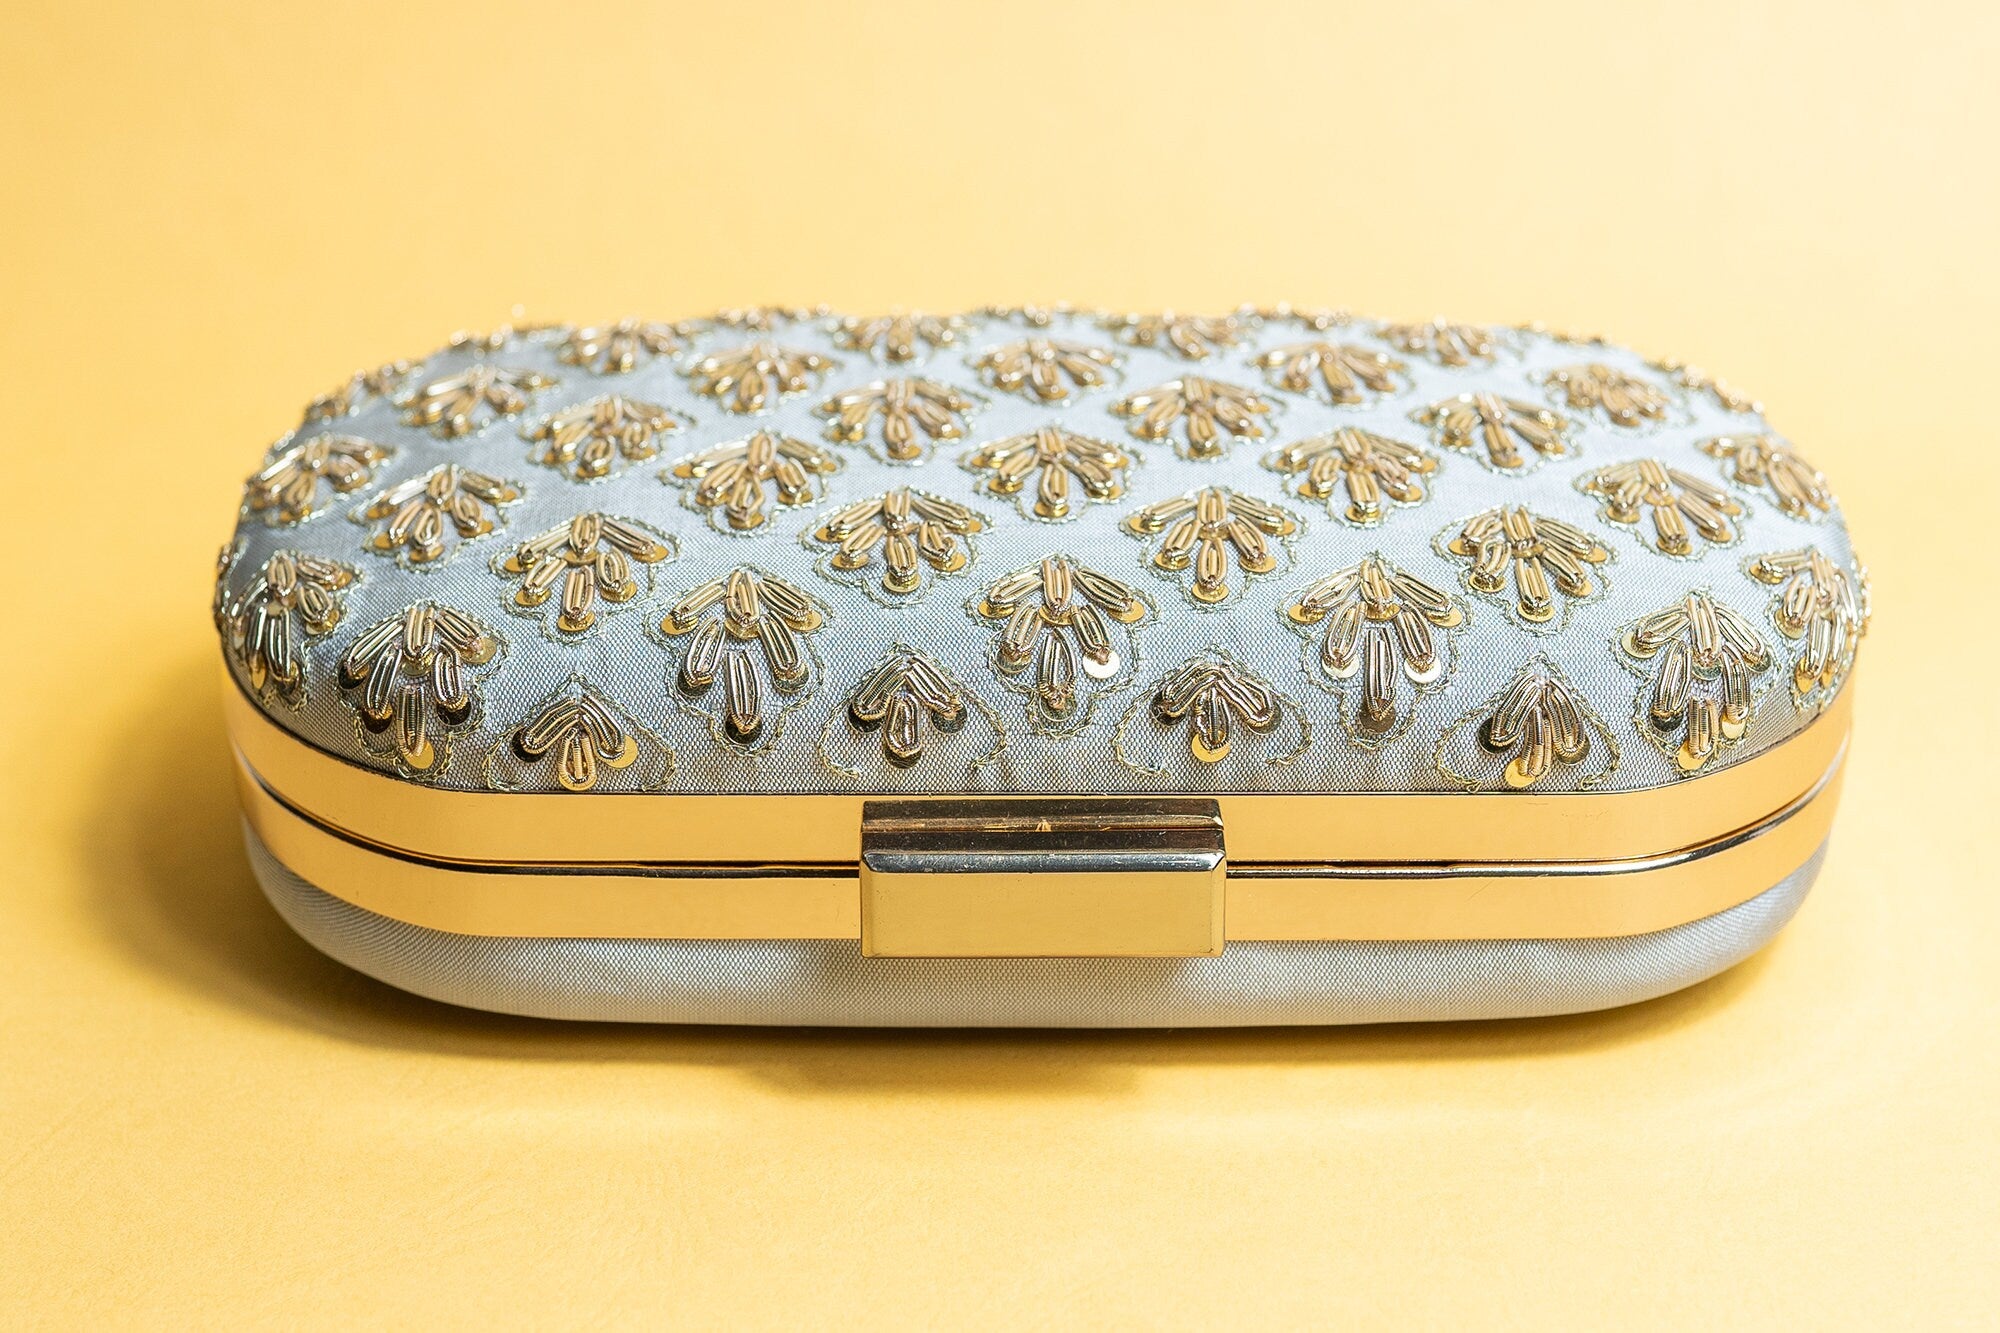 Gray metal embroidery clutch bag with detachable sling